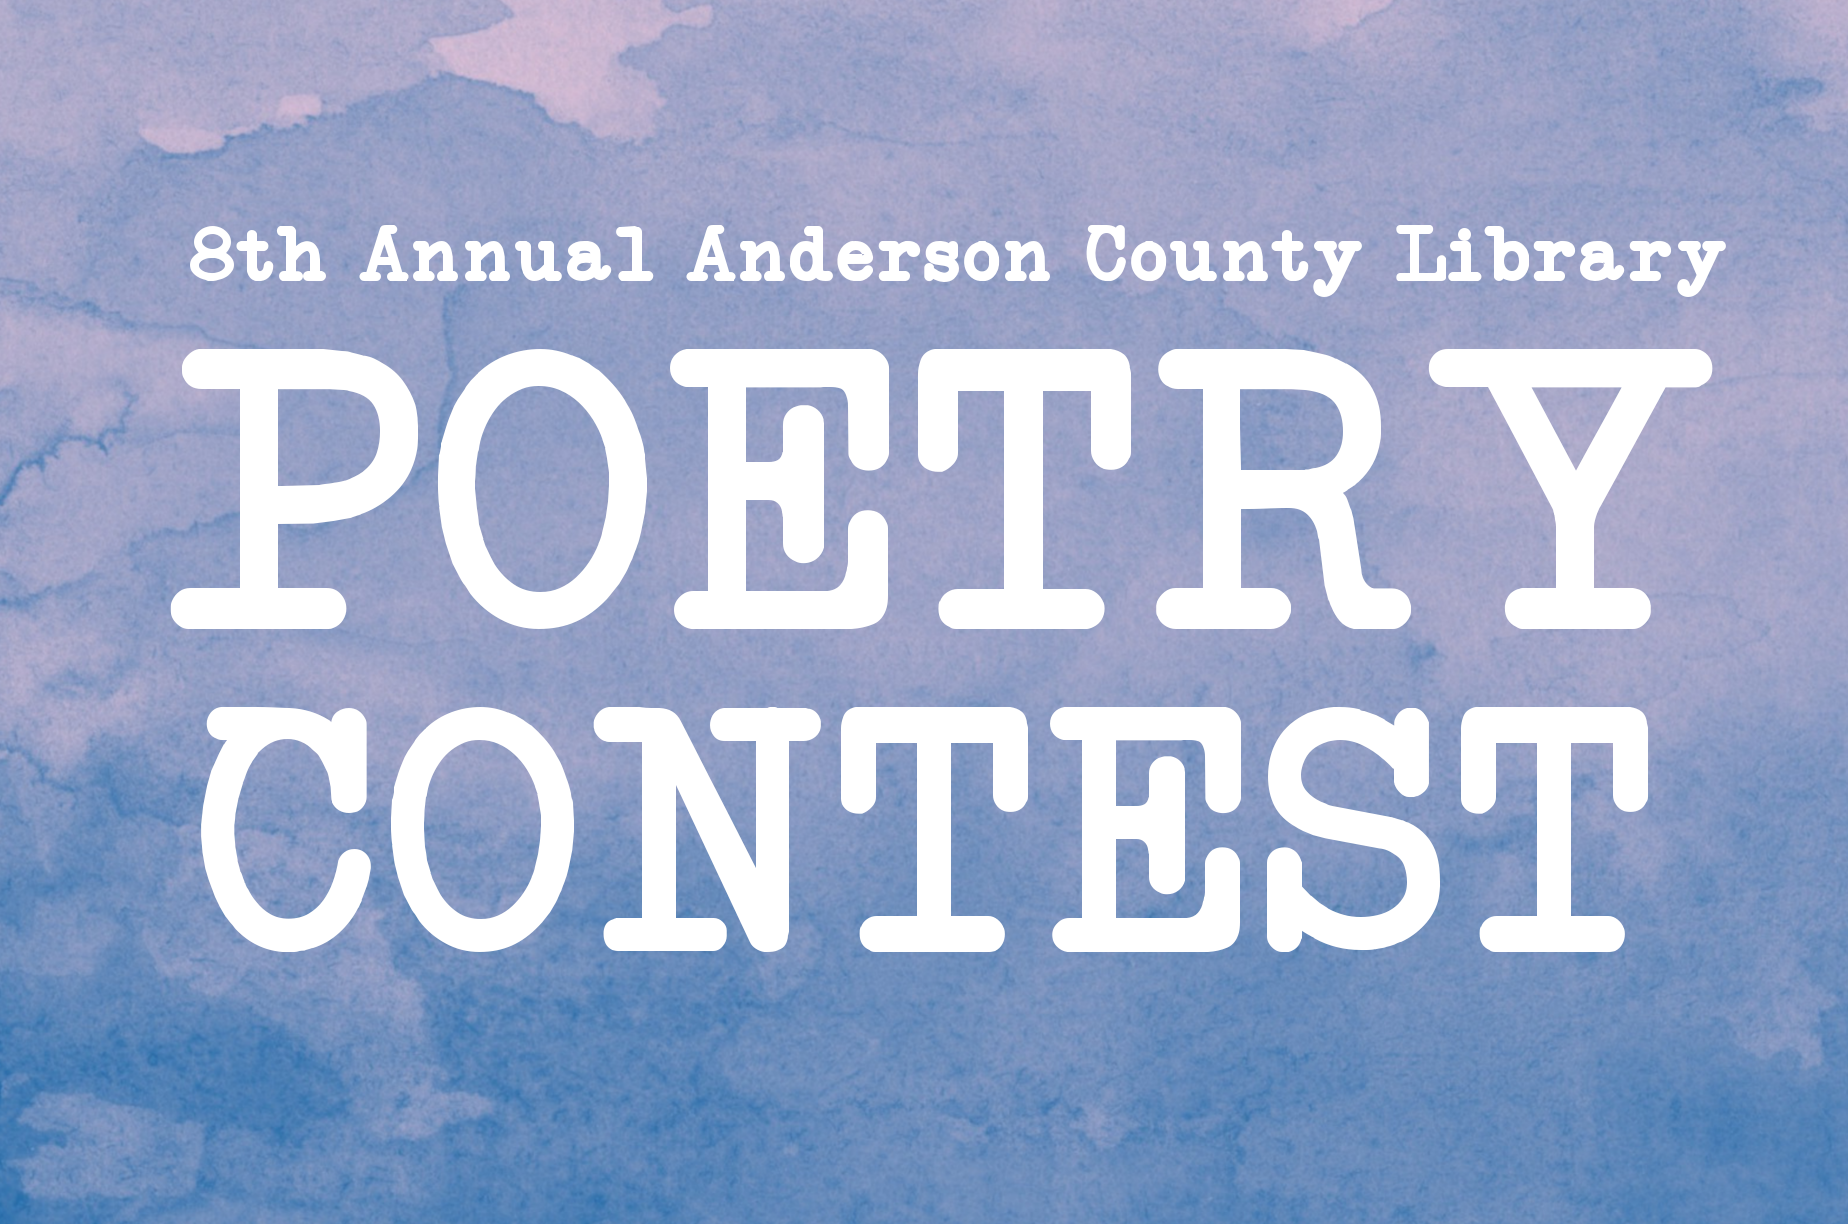 8th Annual Anderson County Library Poetry Contest